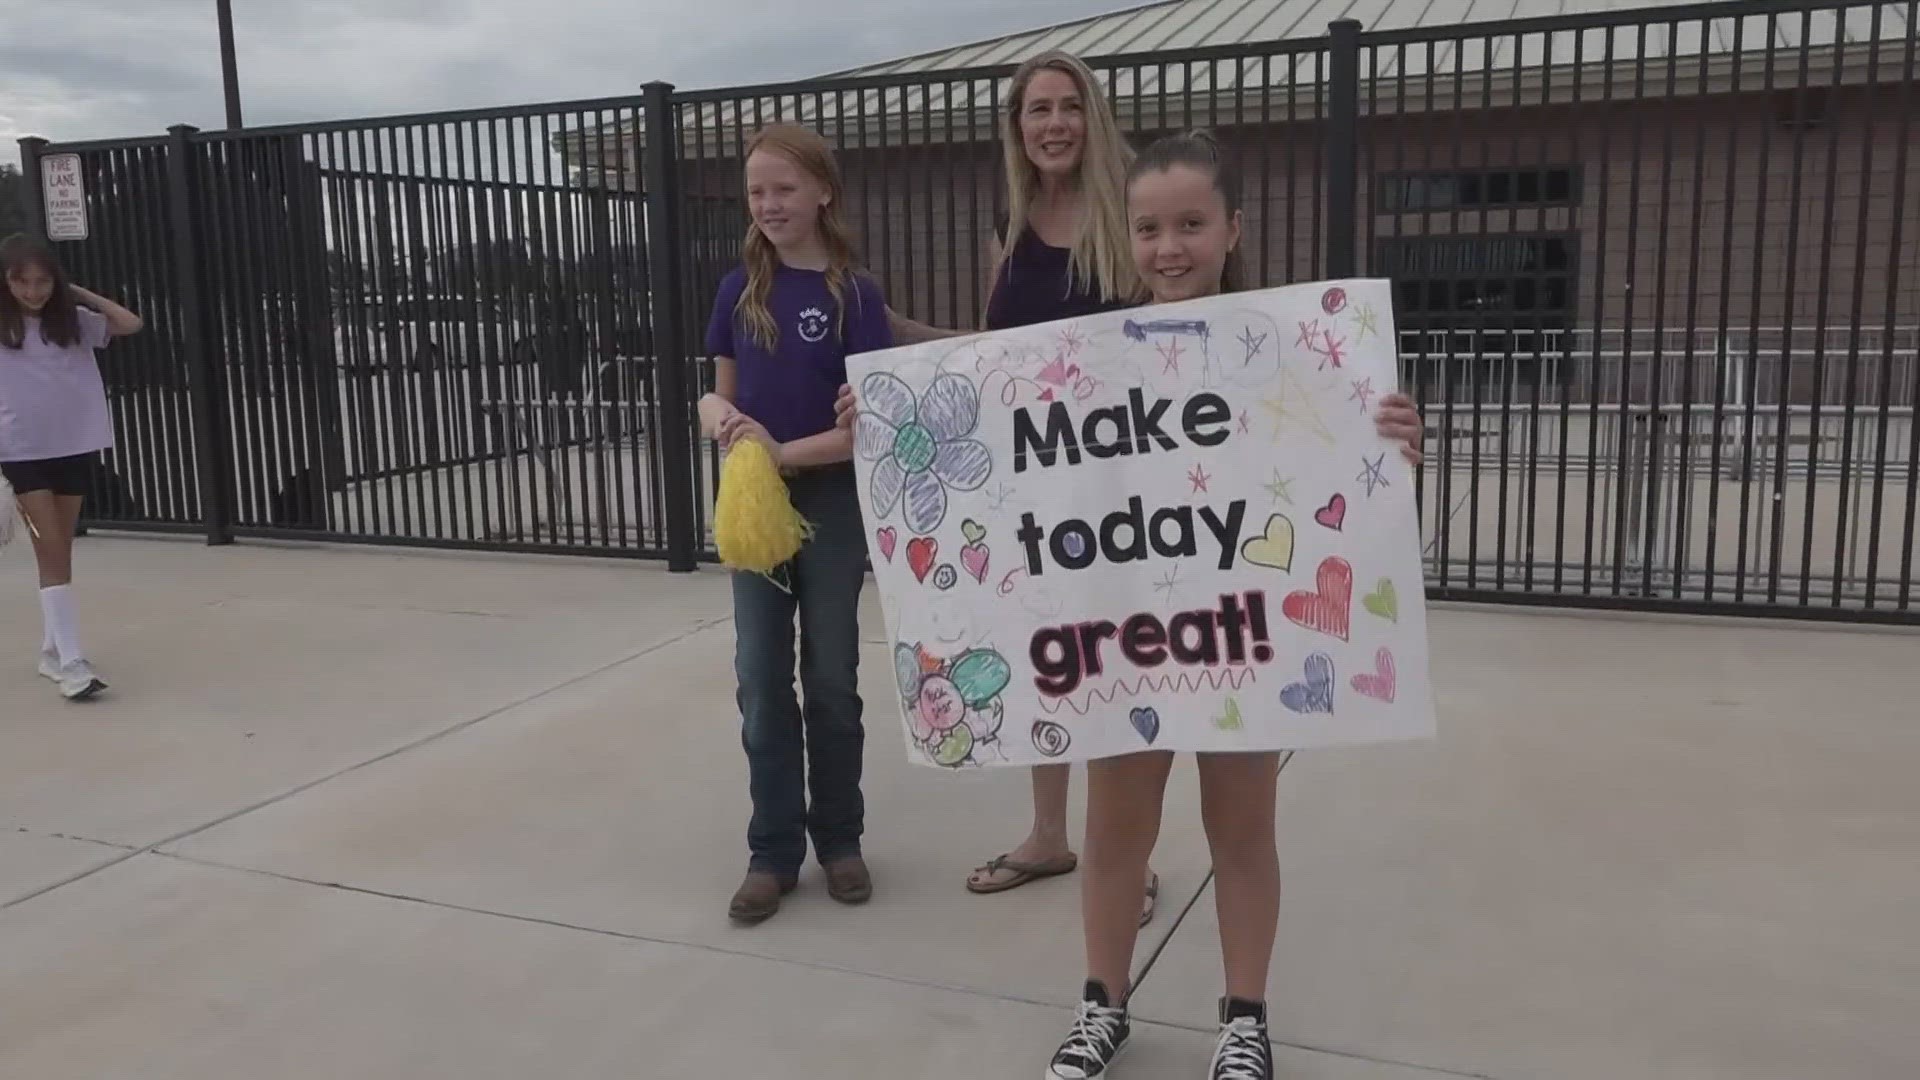 Kids of all ages are getting involved with the kindness club at their school, and already making a difference.